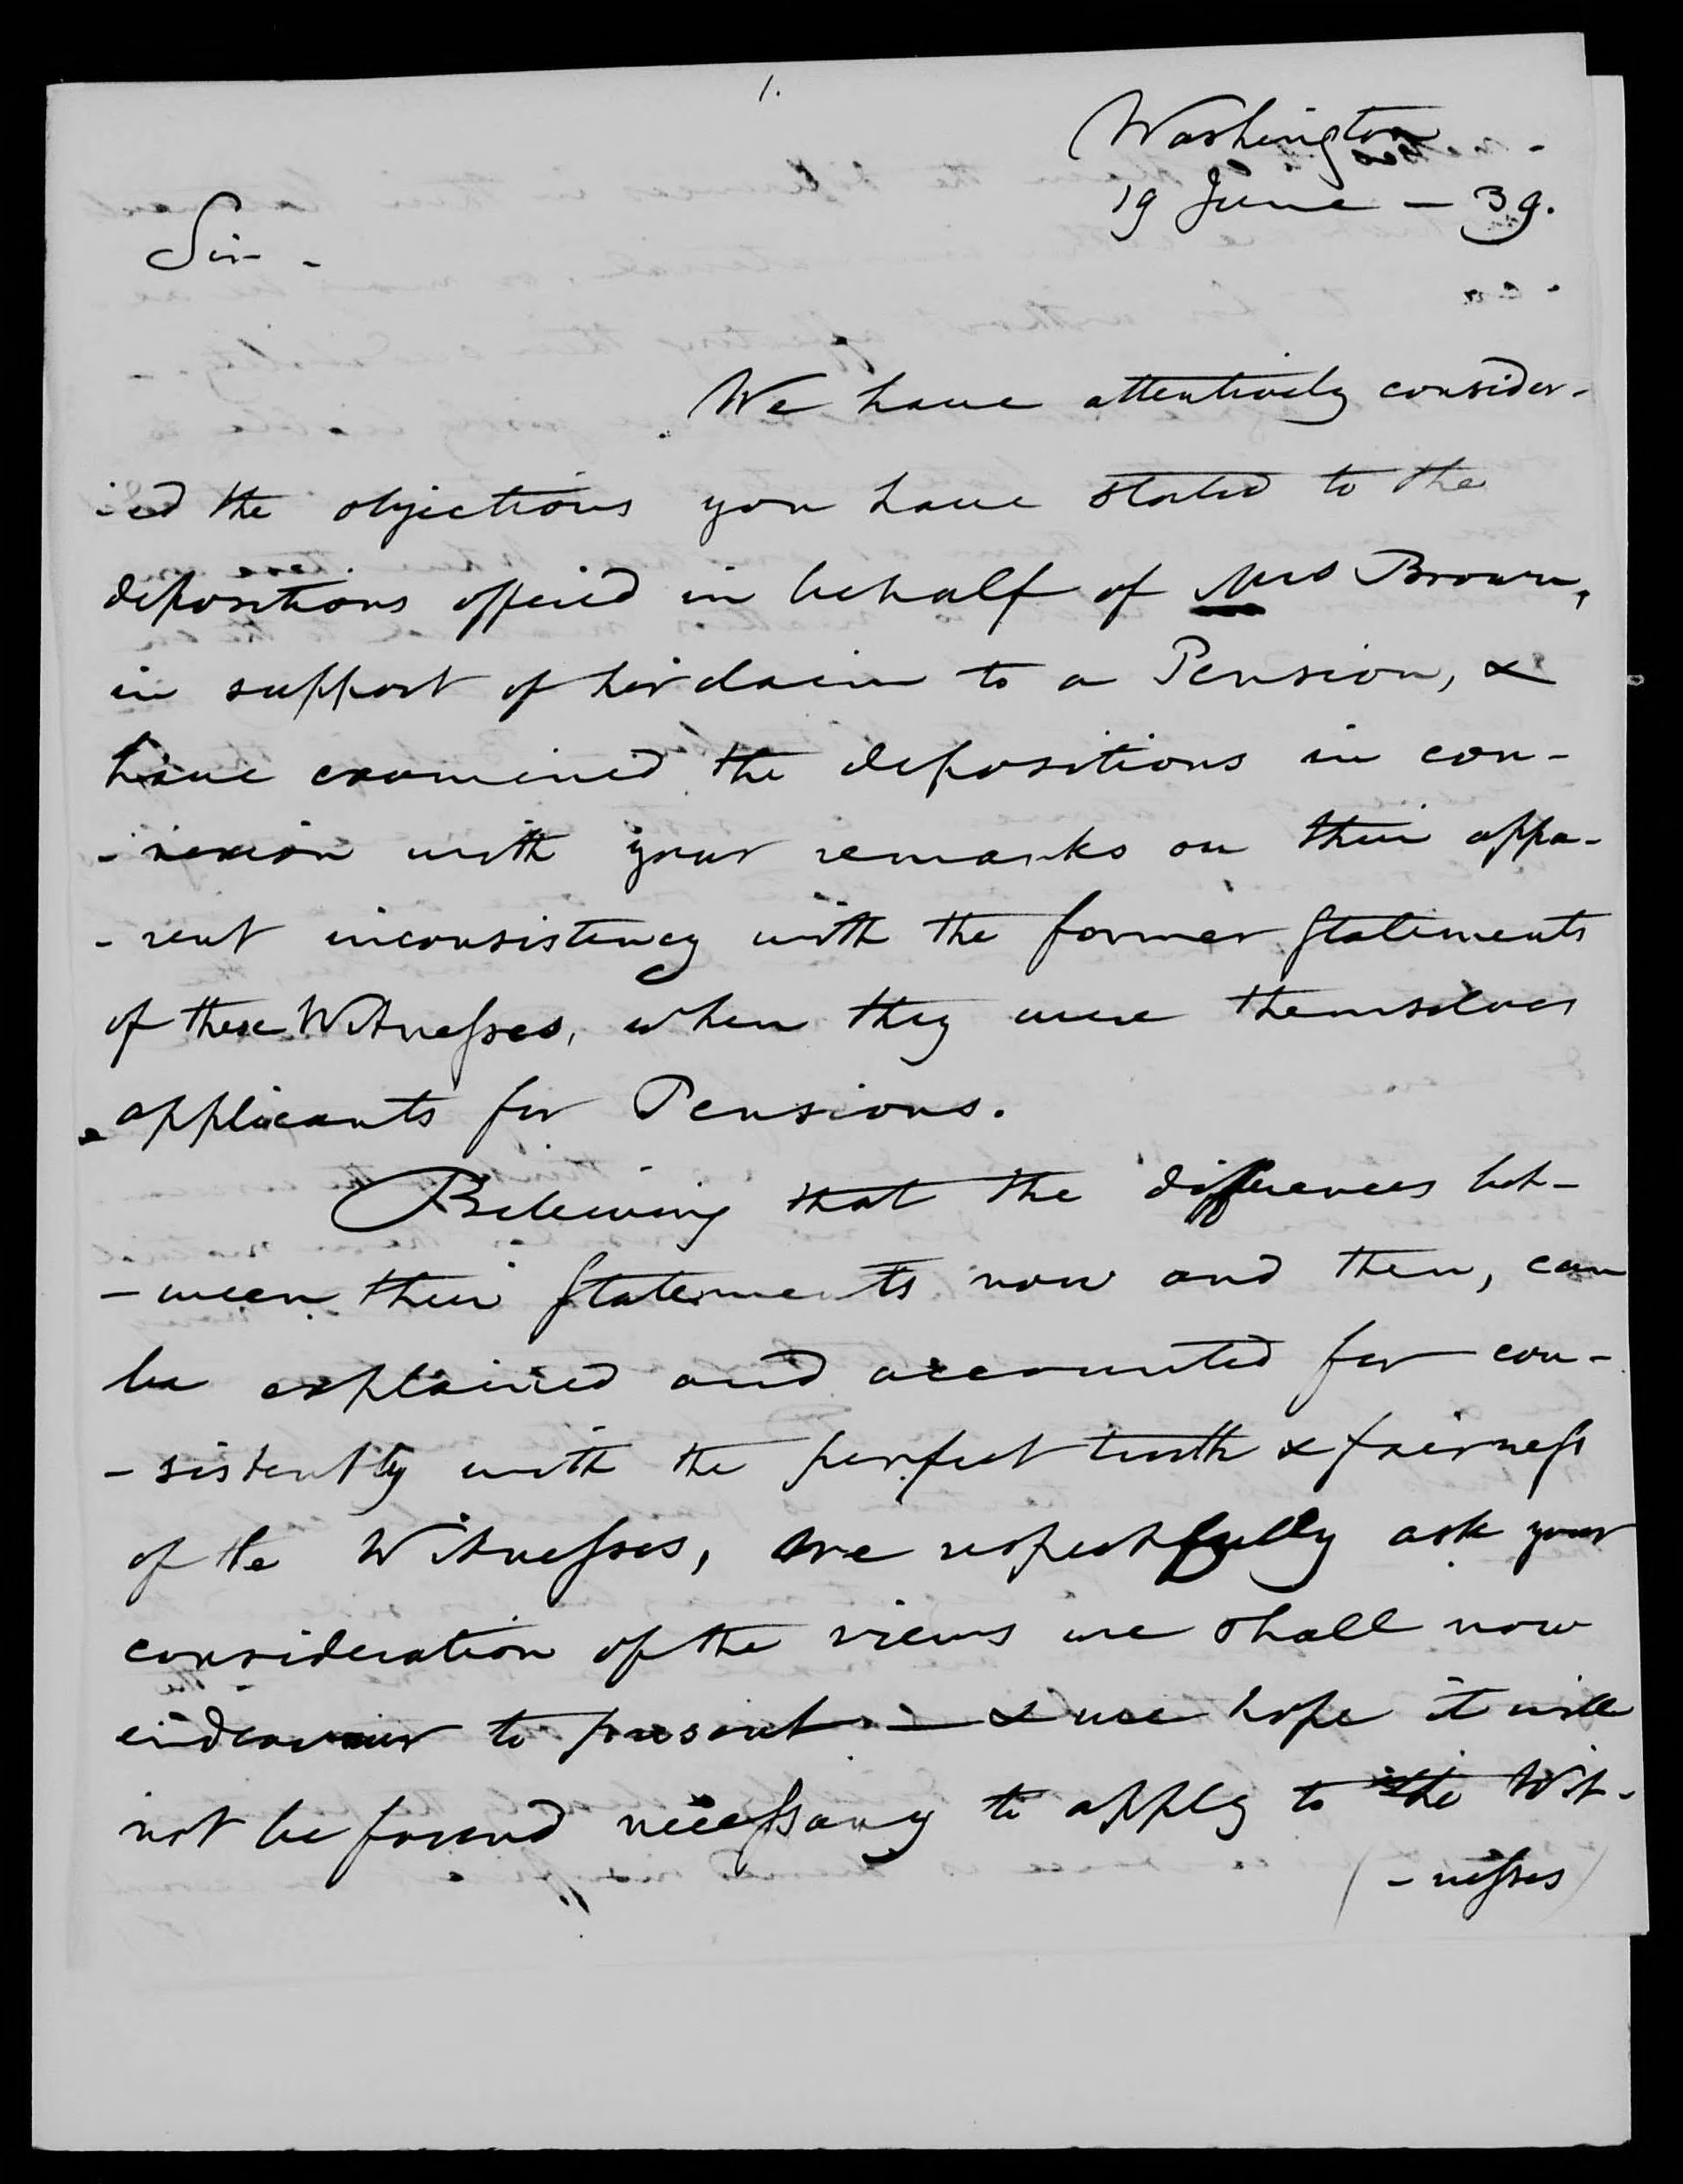 Letter from R. H. Mosby and Lucy Brown to the United States Pension Office, 19 June 1839, page 1